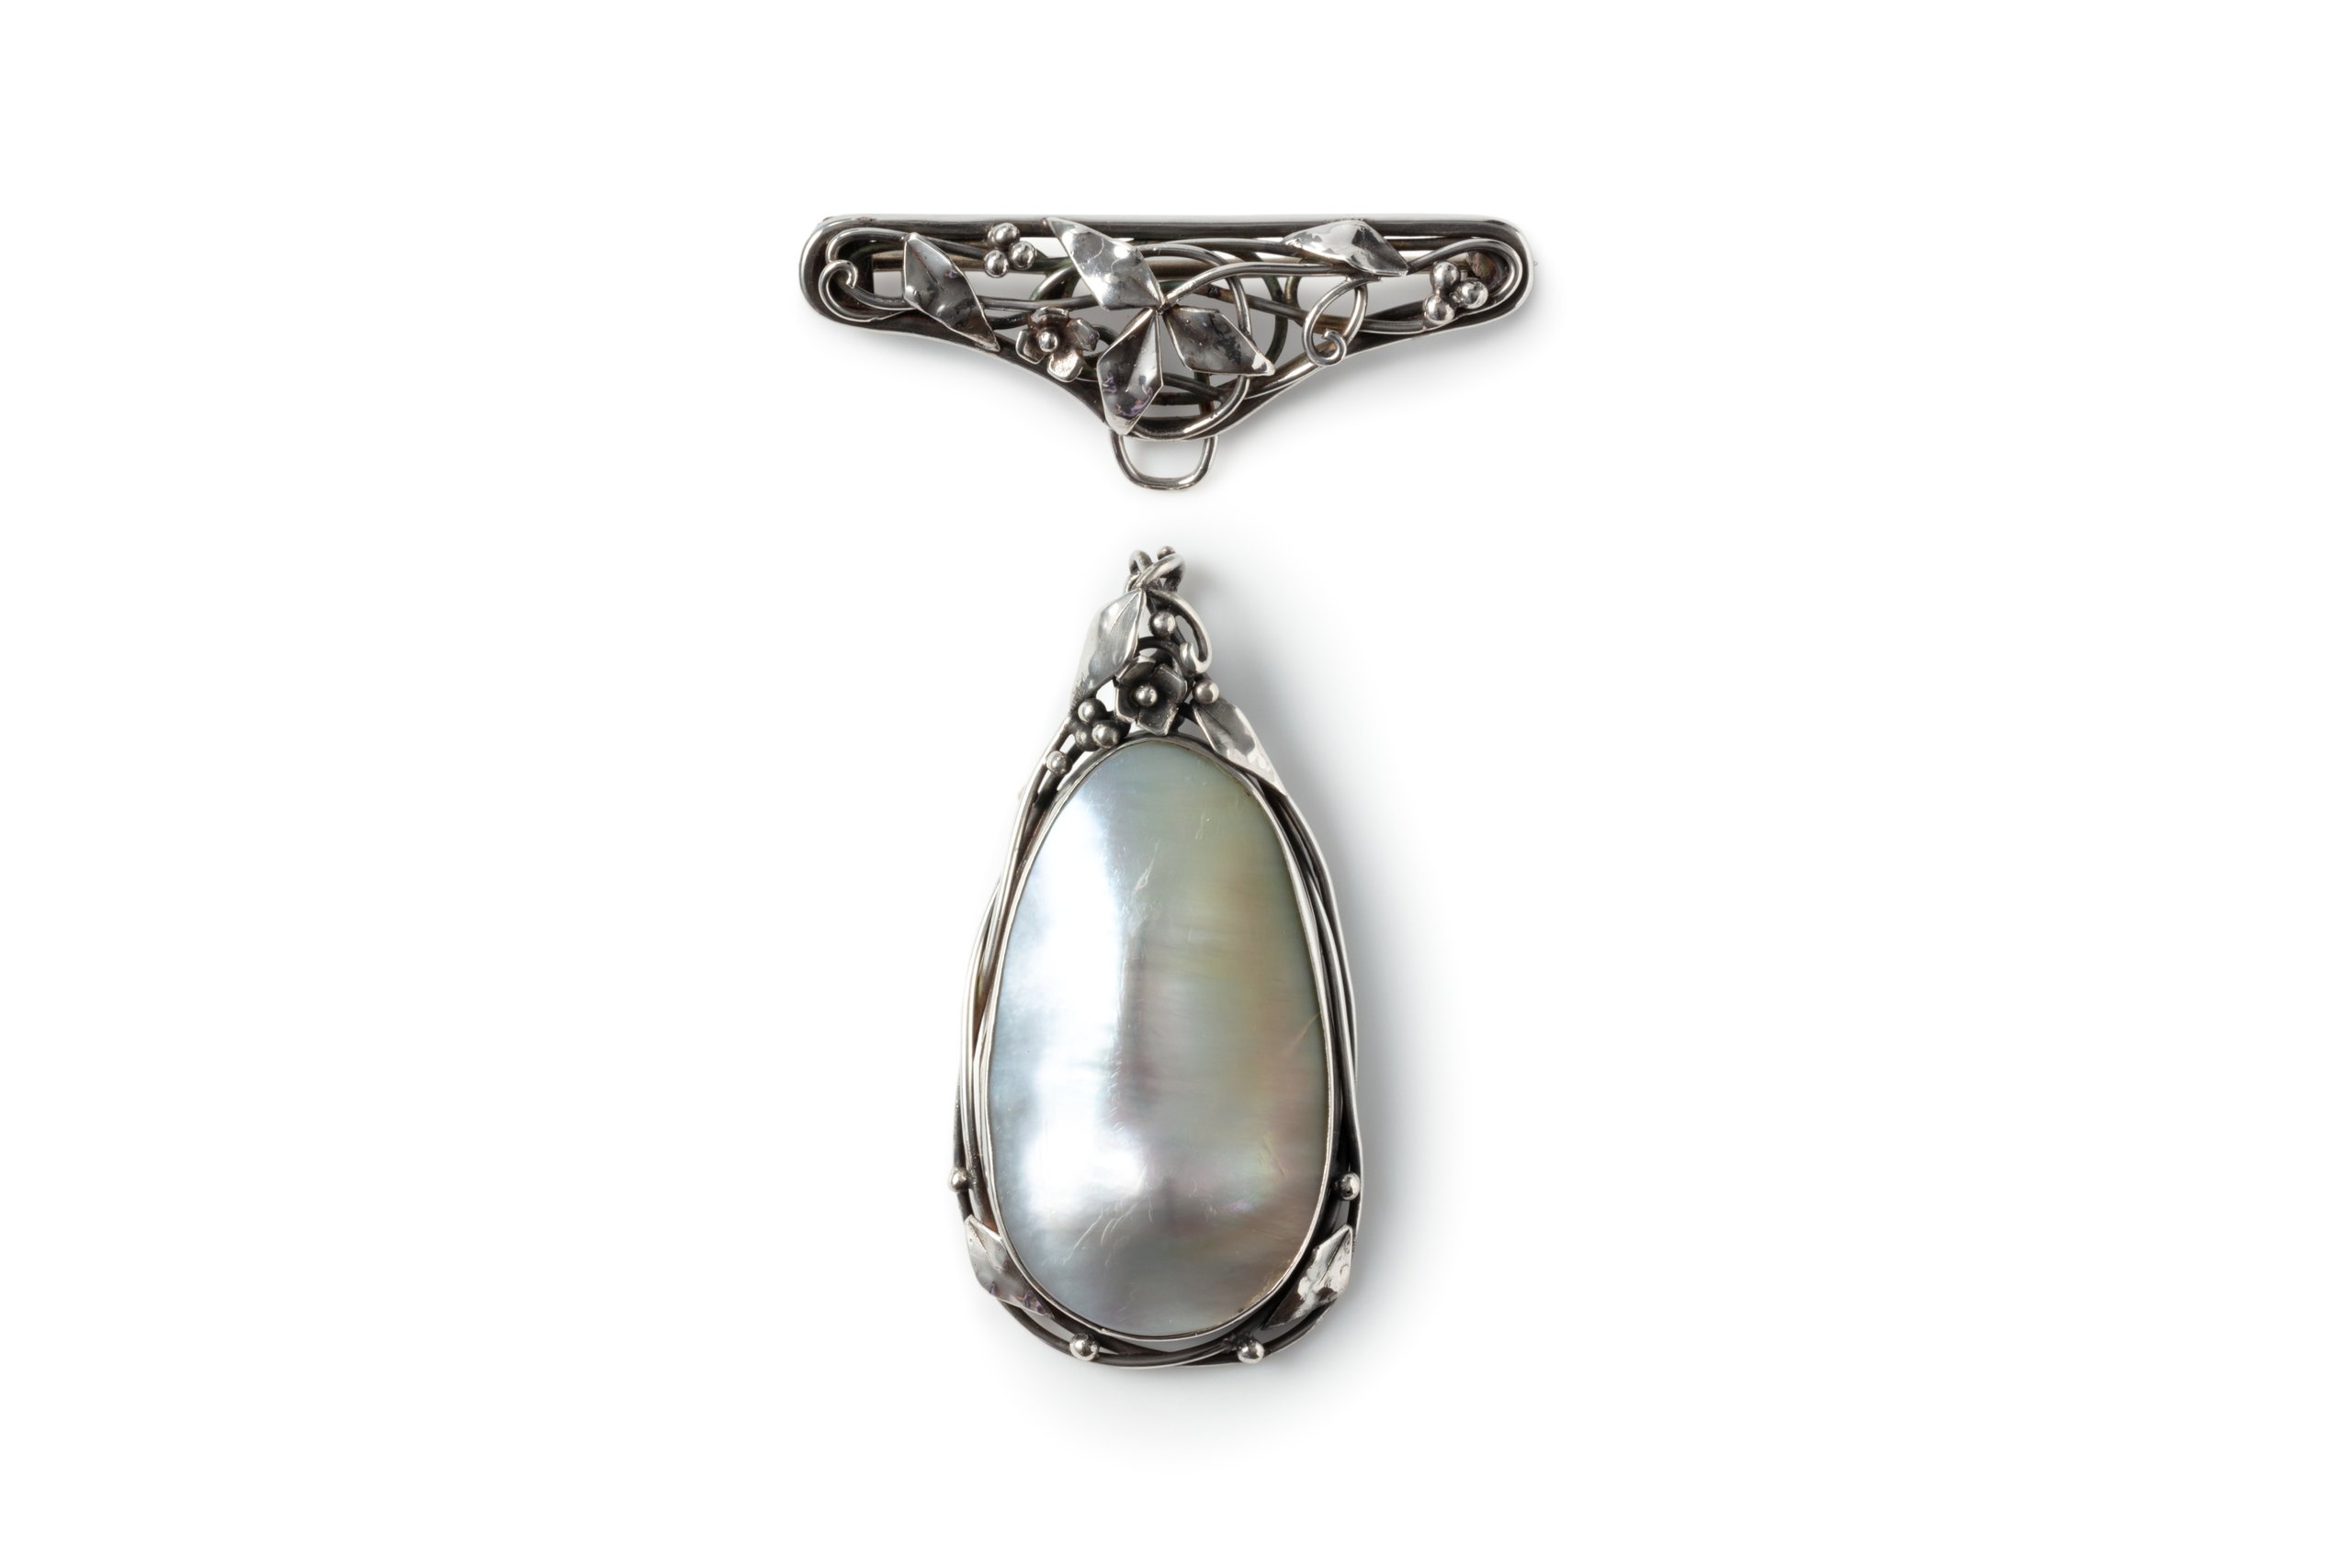 Silver and blister pearl brooch by Dorothy Wager